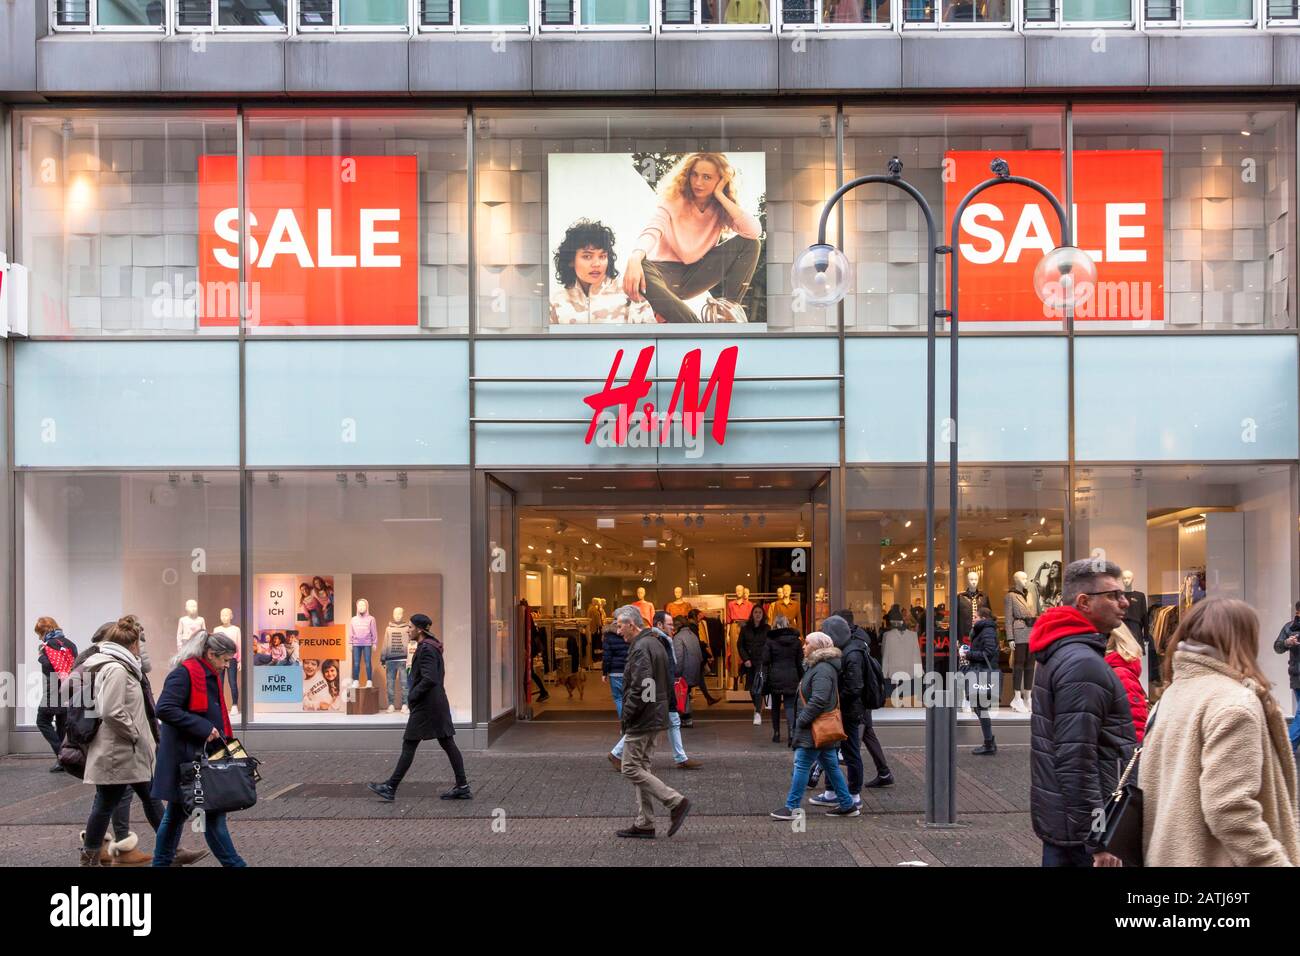 H And M H&m High Resolution Stock Photography and Images - Alamy